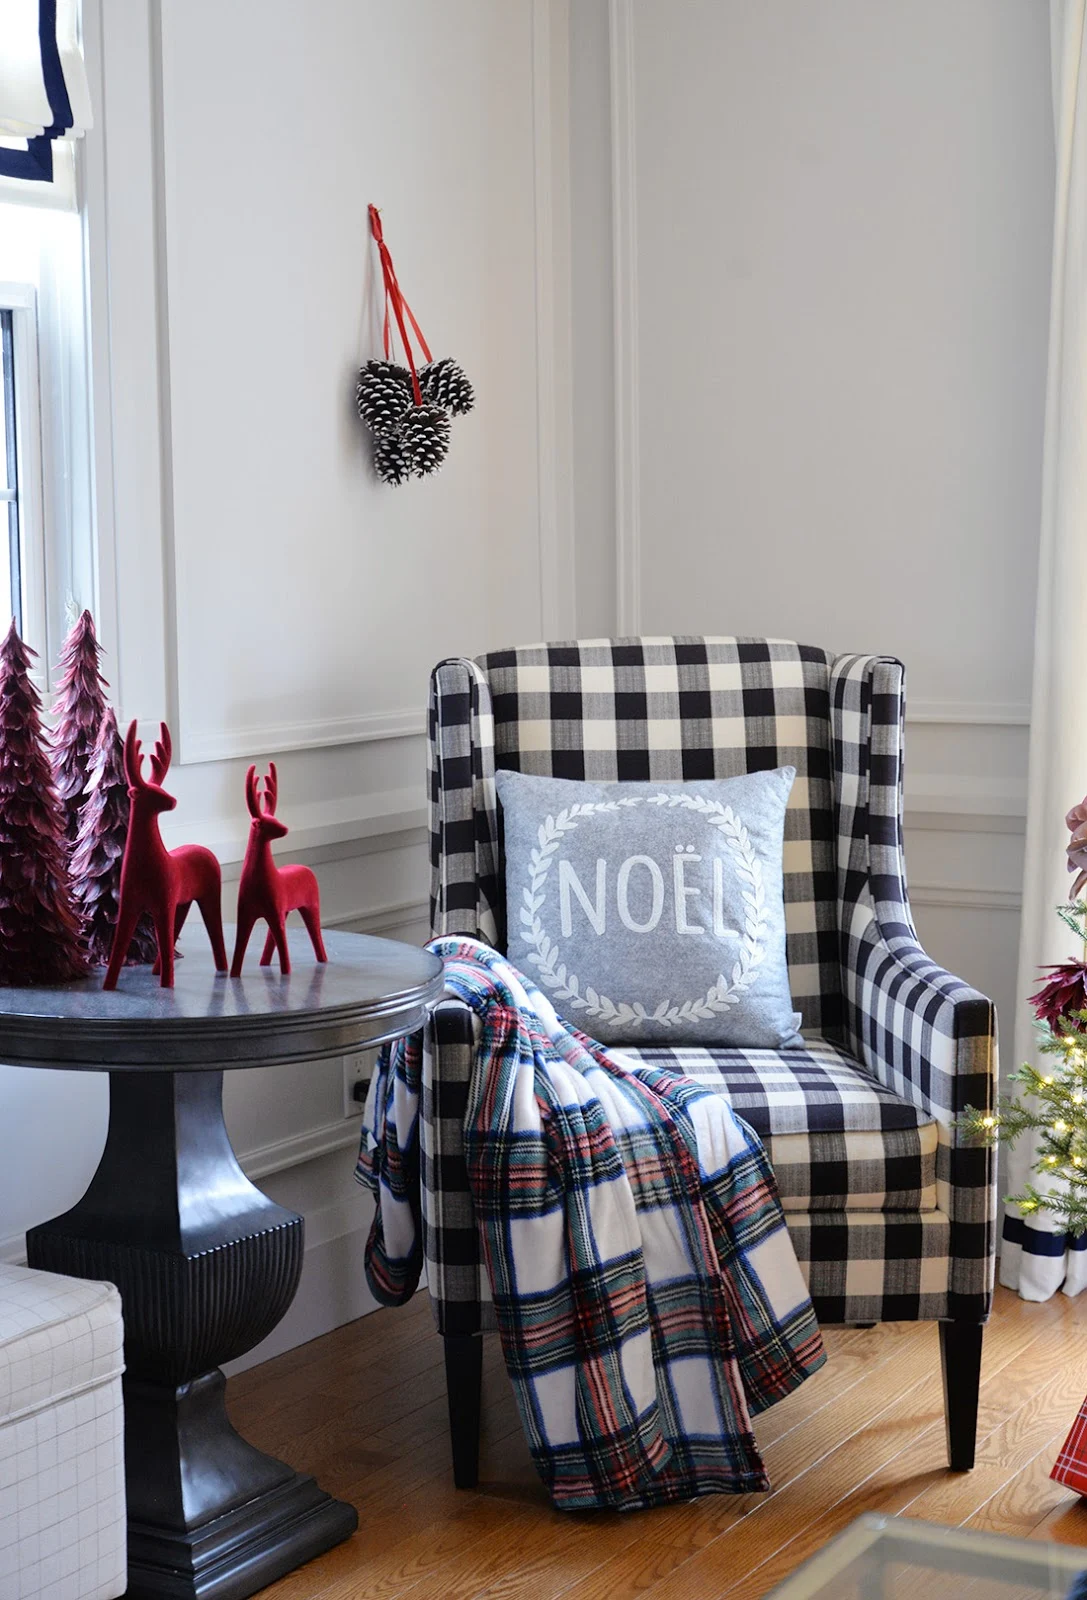 Living room decorated for Christmas with red and white Christmas tree. Canadian Tire mulberry collection Christmas ornaments. Buffalo plaid chair.